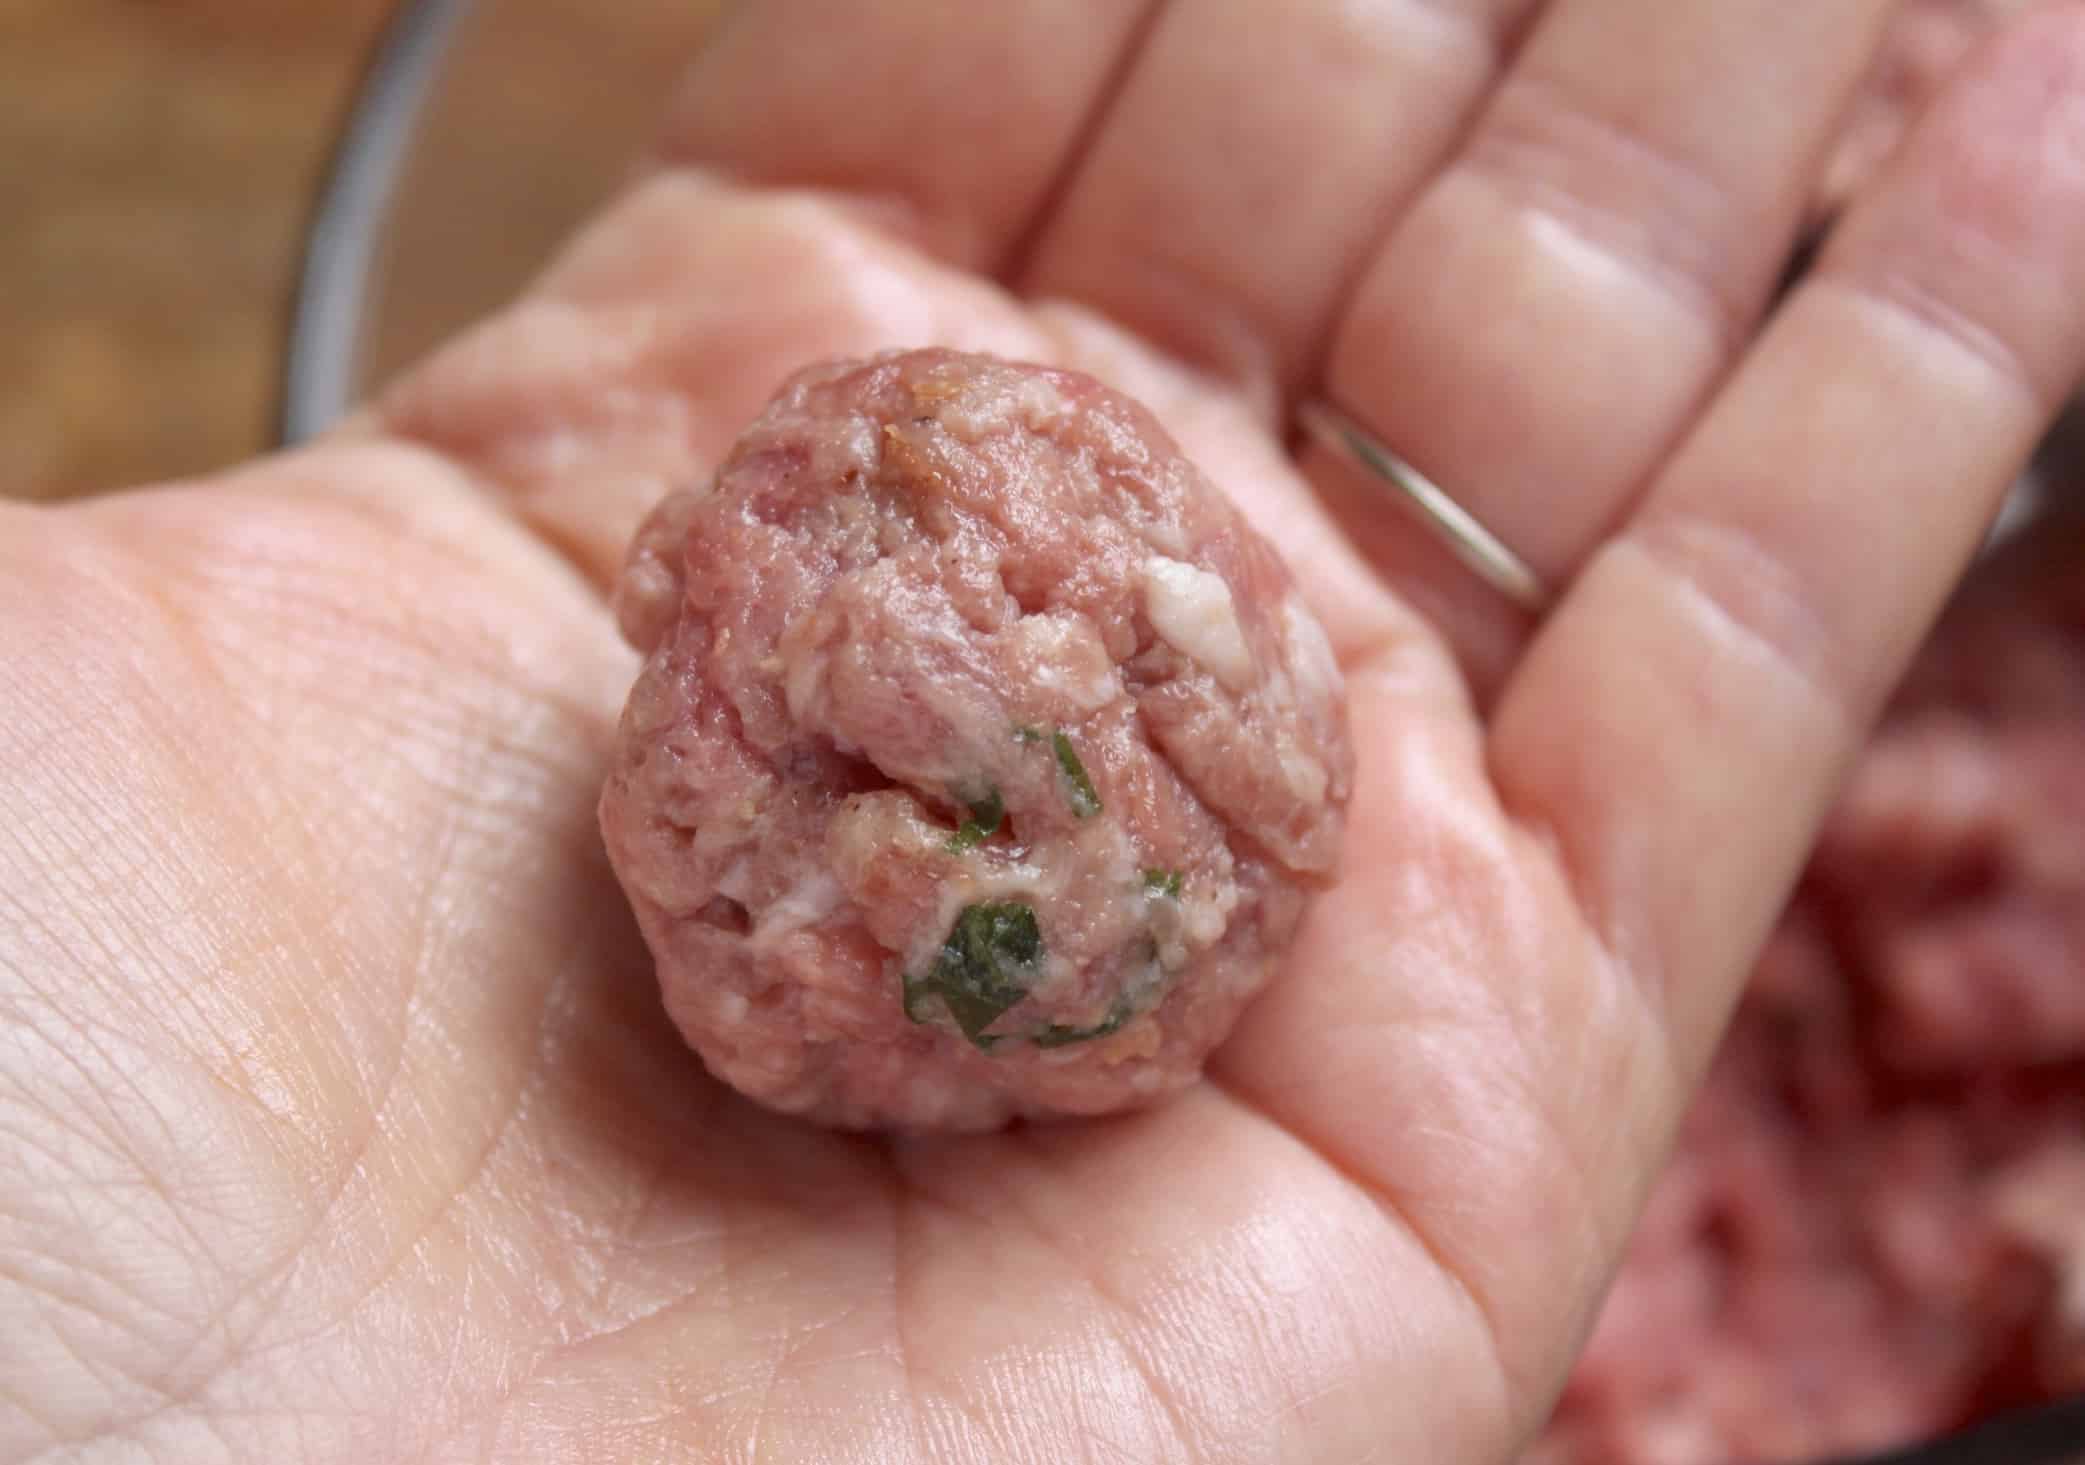 shaping meatballs, meatball on a hand